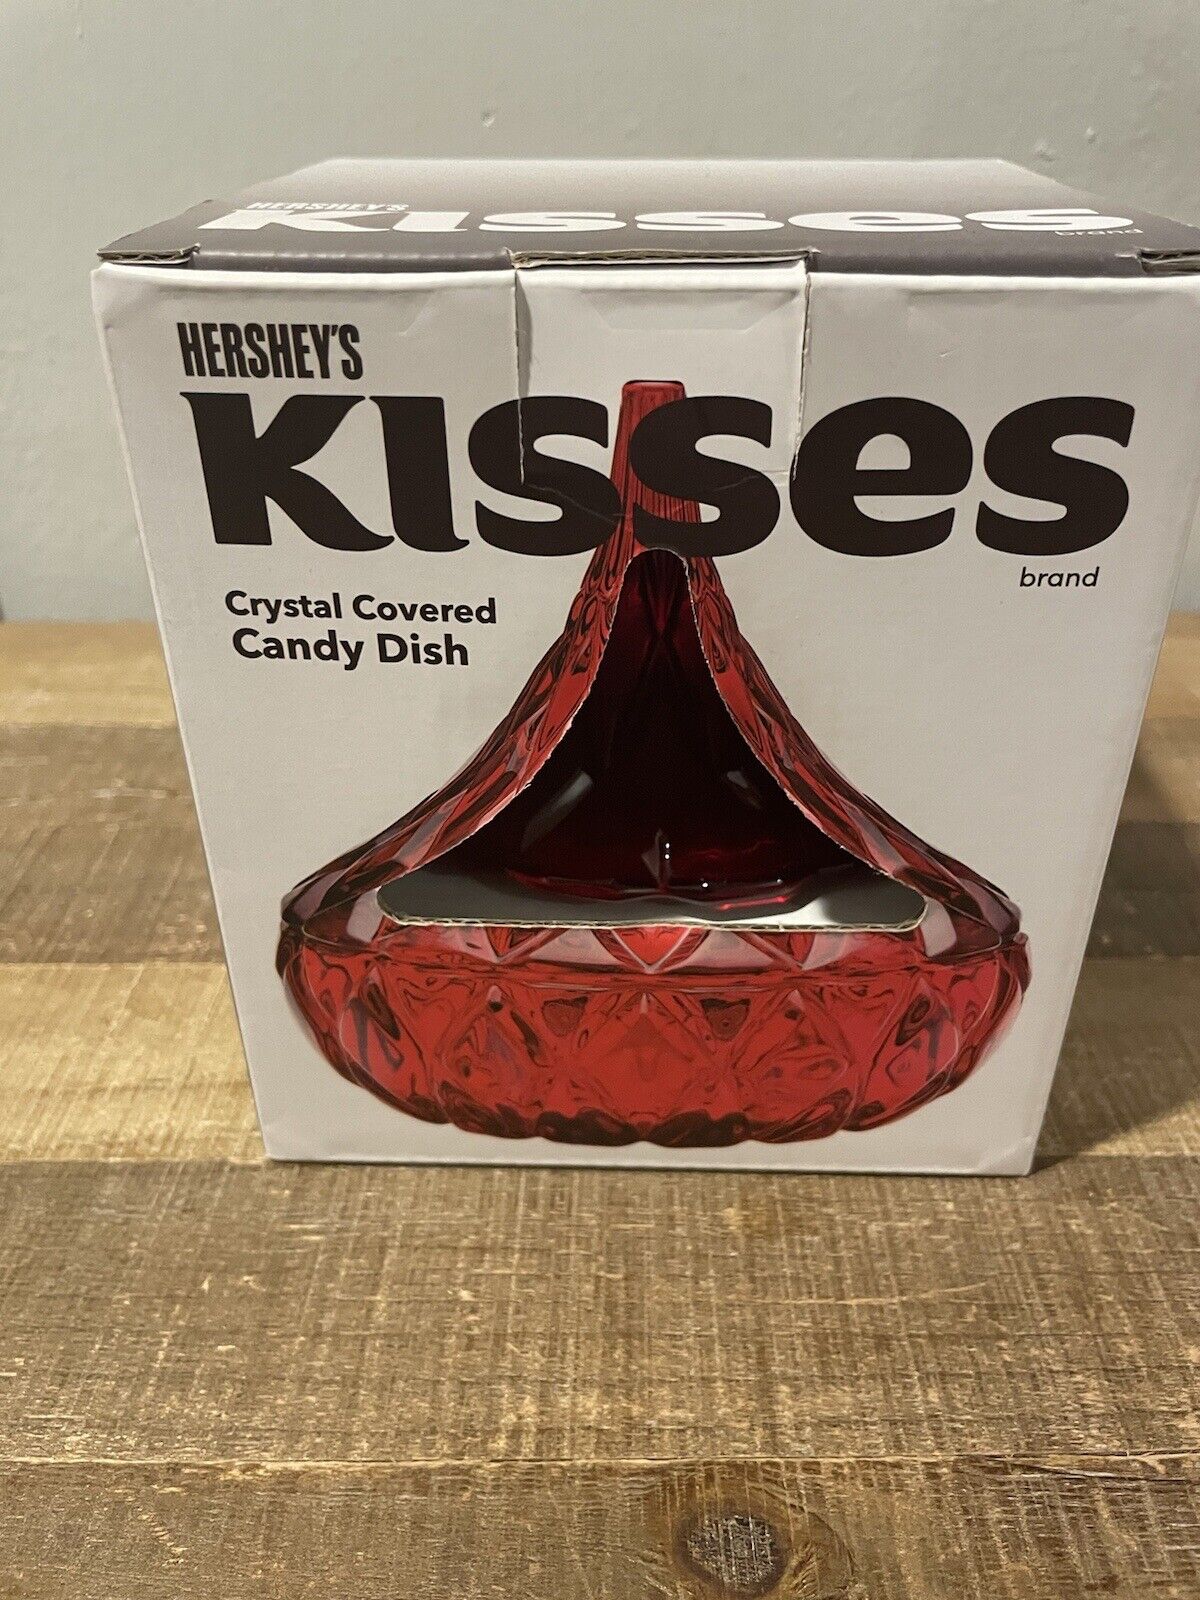 Hershey's Kisses 2019 Red Crystal Covered Candy Dish Shannon Brand new